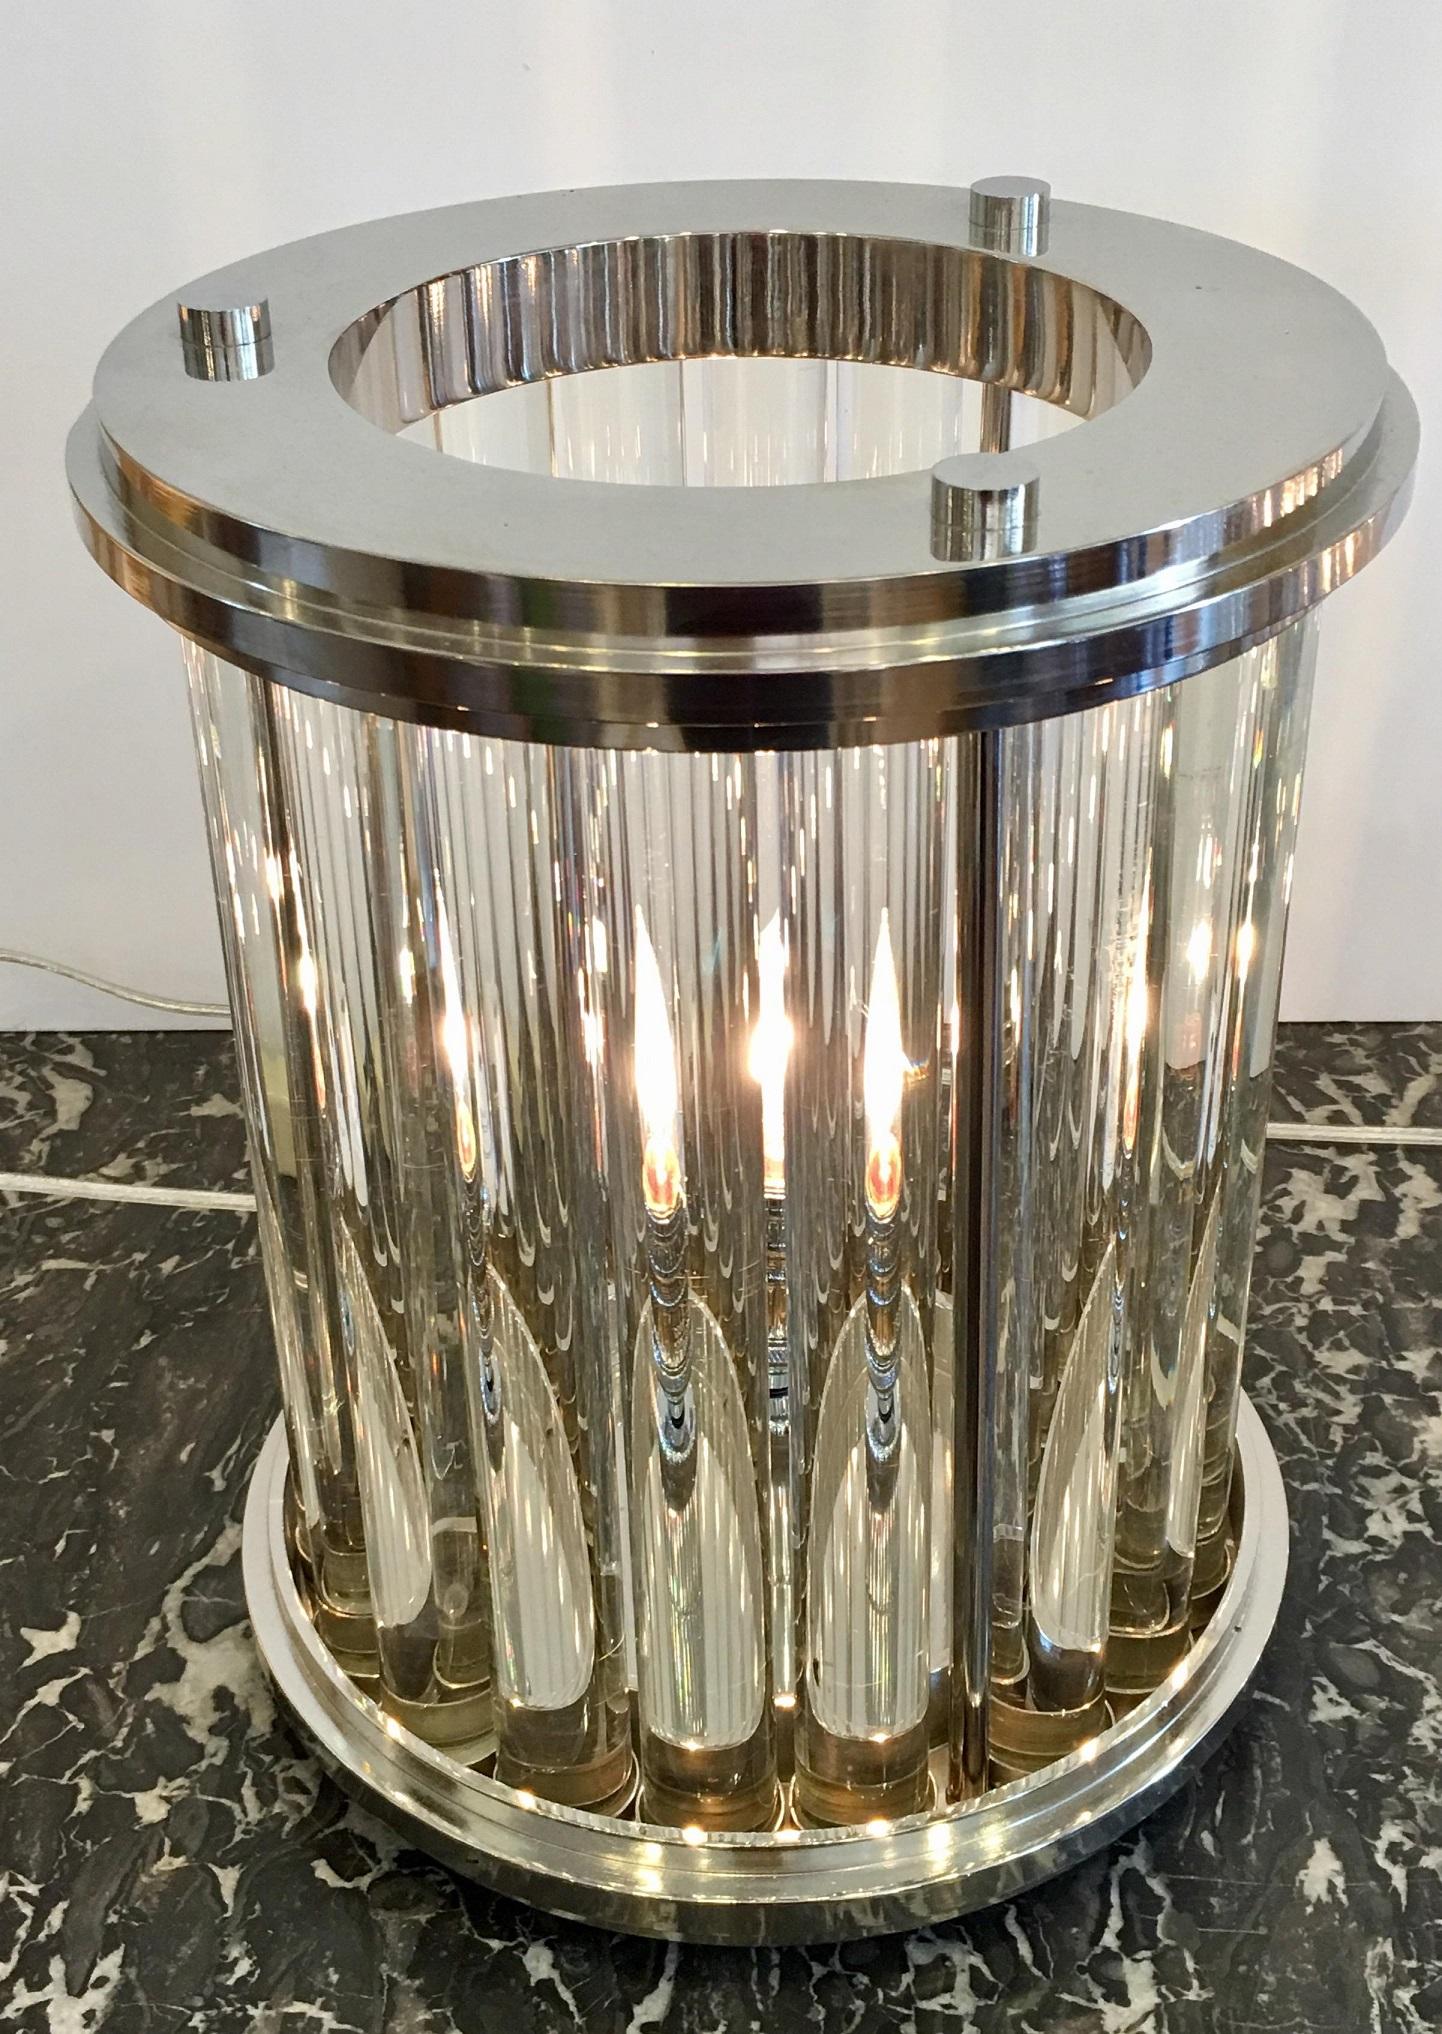 Pair of Art Deco style nickel-plated glass rod modernist lamps by Randy Esada.